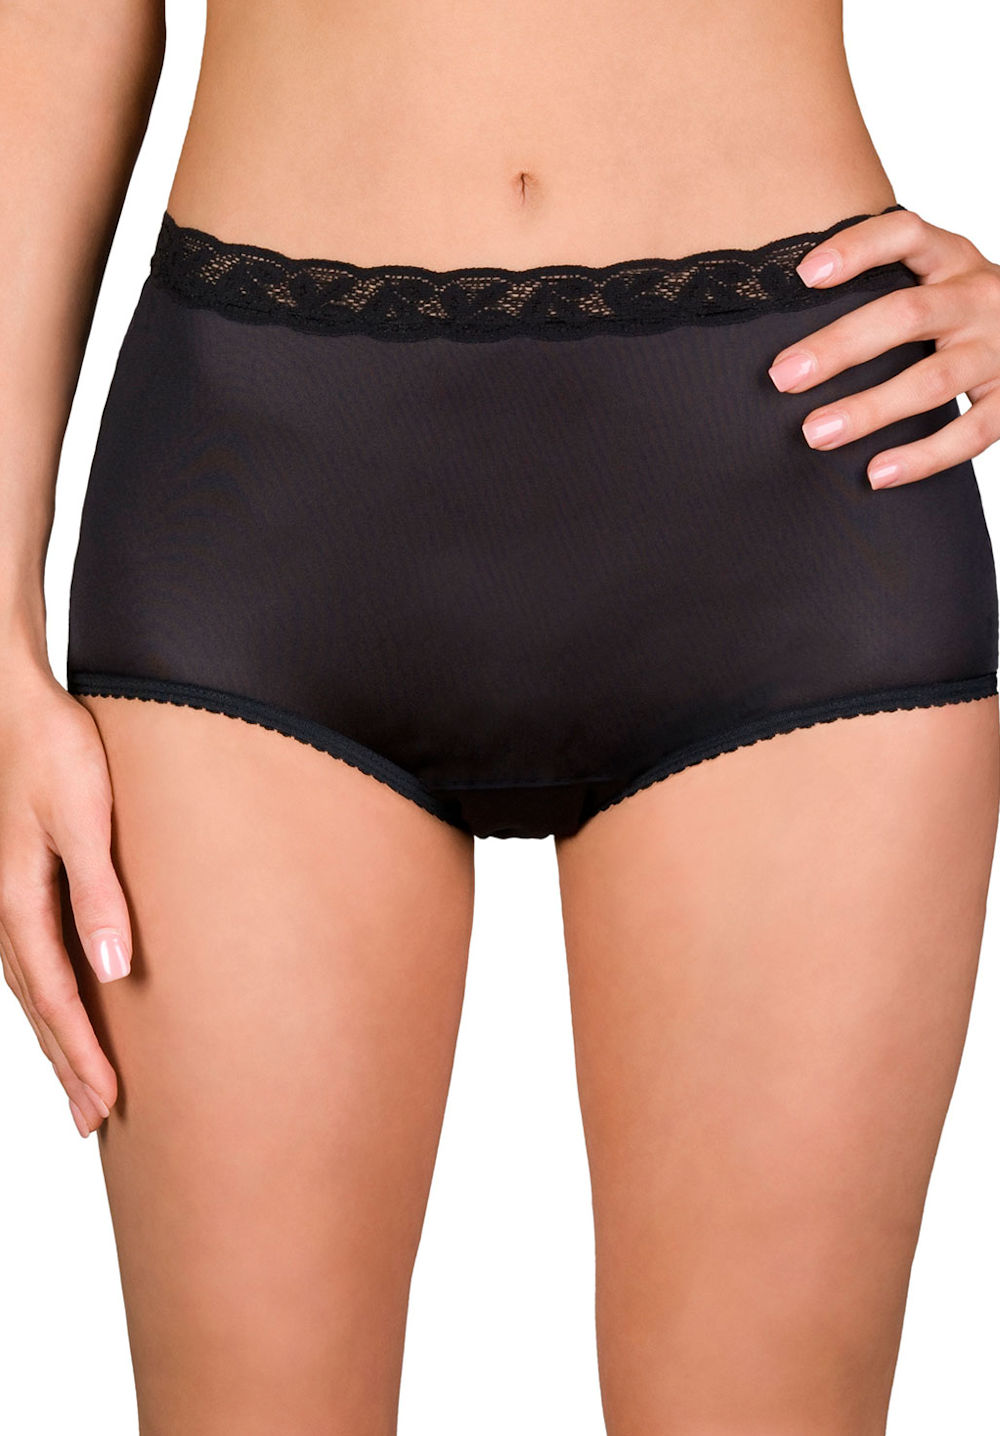 Shadowline Lace Nylon Brief Panty – 17014 - Basics by Mail